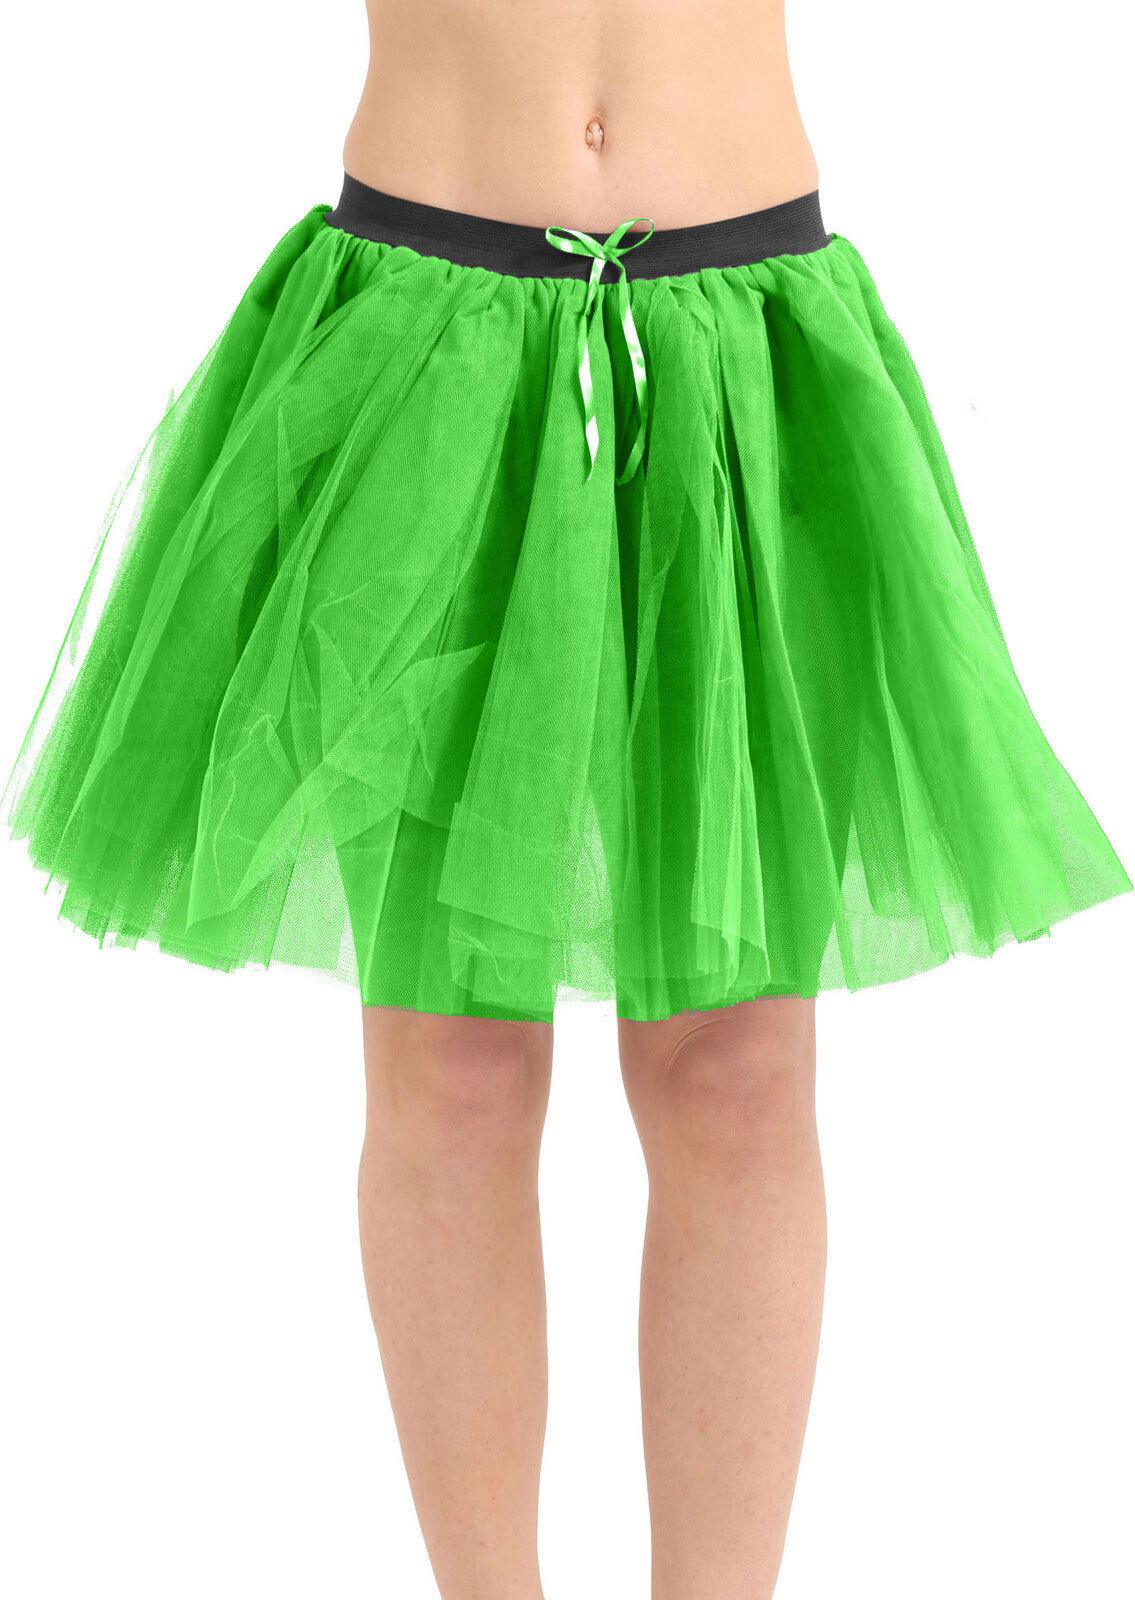 Ladies Girls 3 Layers 18 inches Tutu Skirt 80’s Hen Night Dance Wear Party Skirt - Labreeze